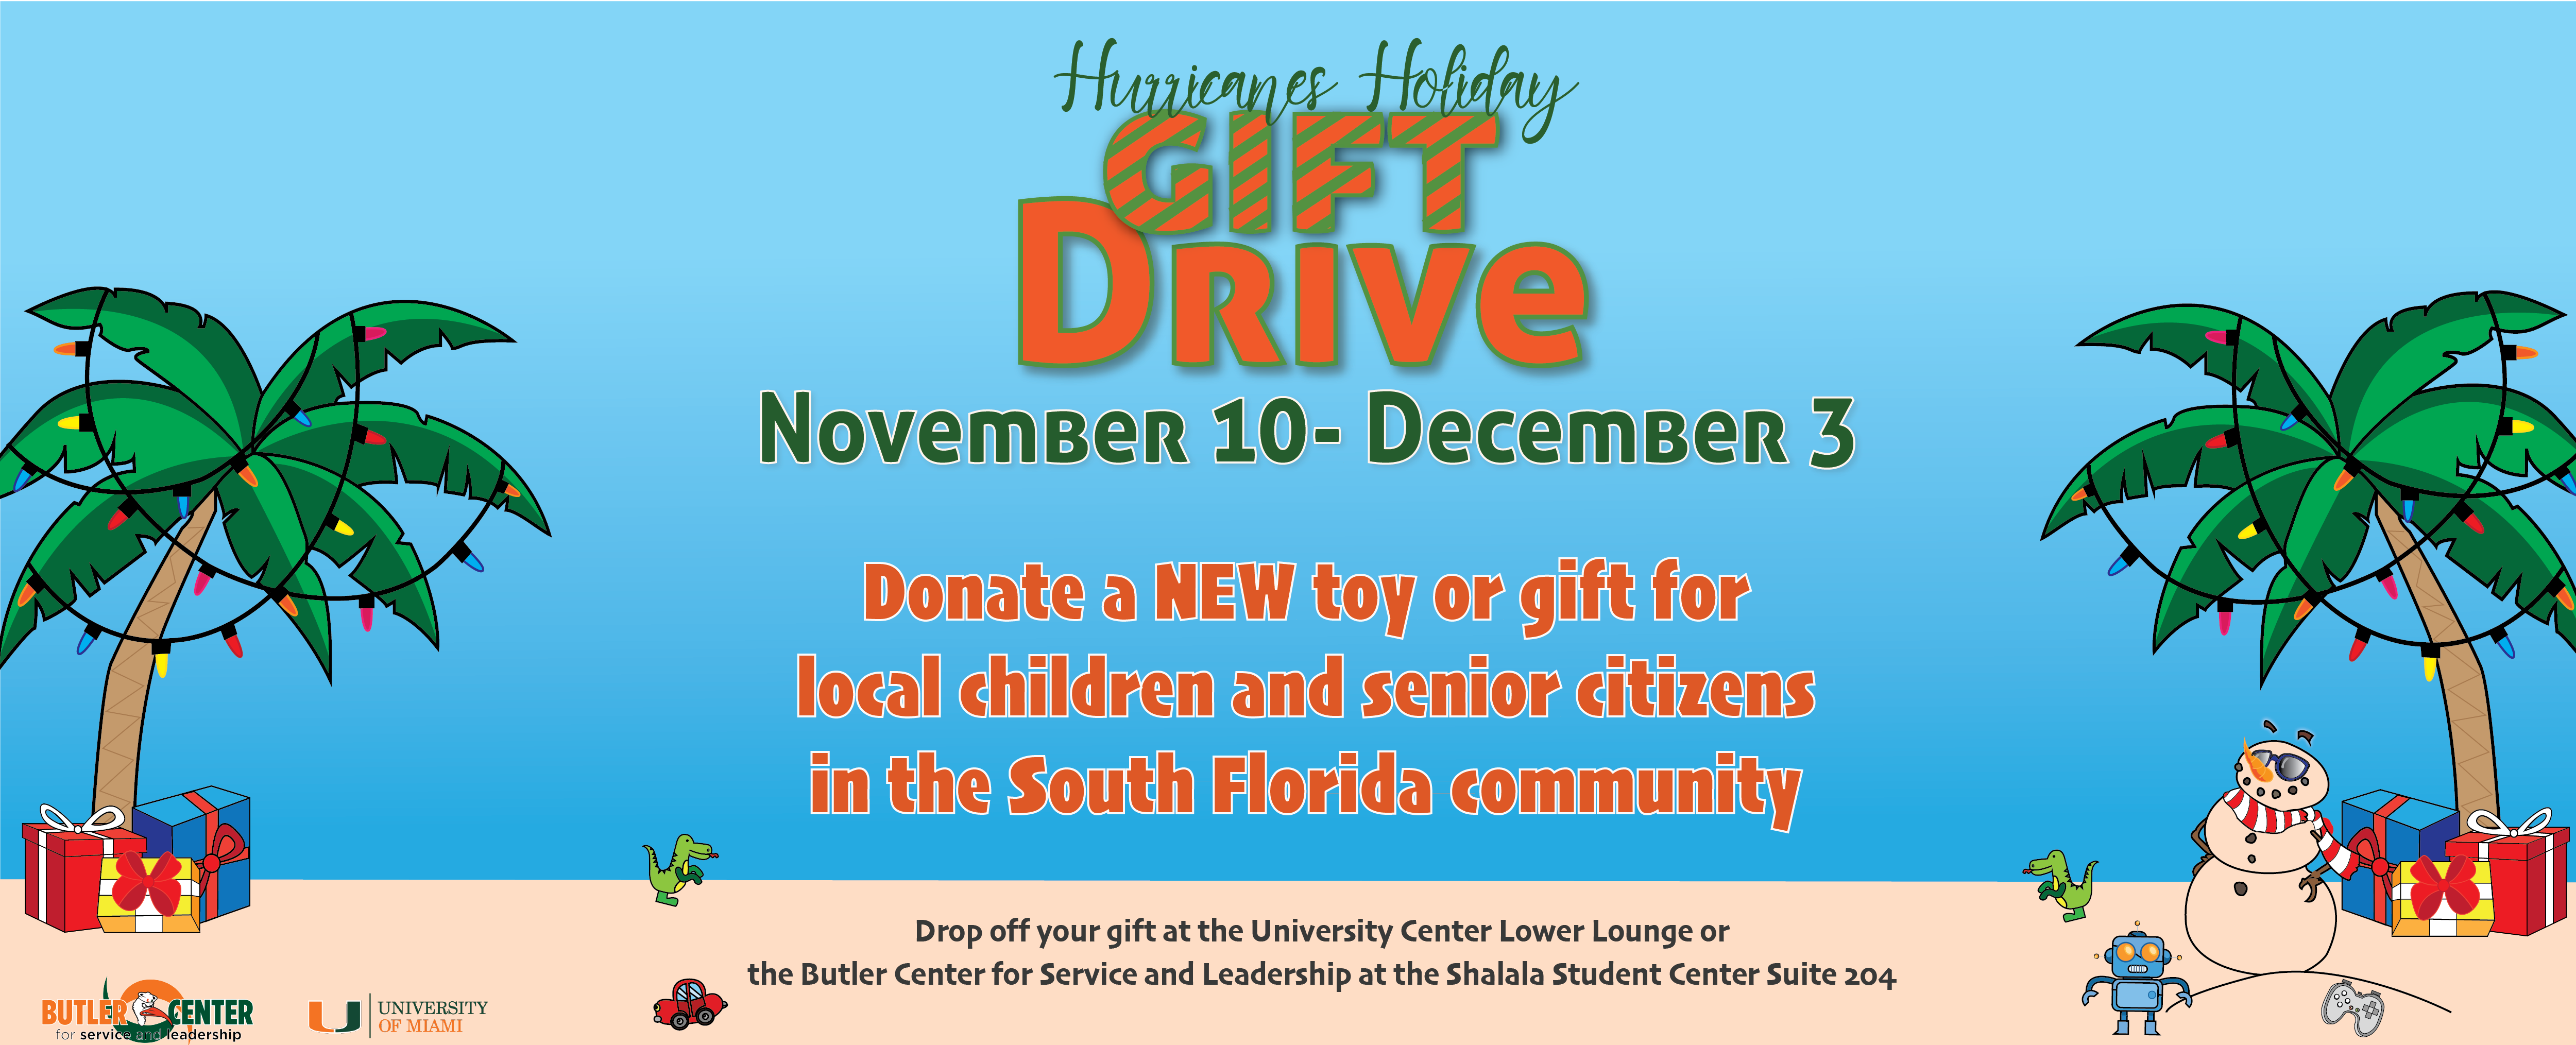 Hurricanes Holiday Gift Drive 2021 Flyer